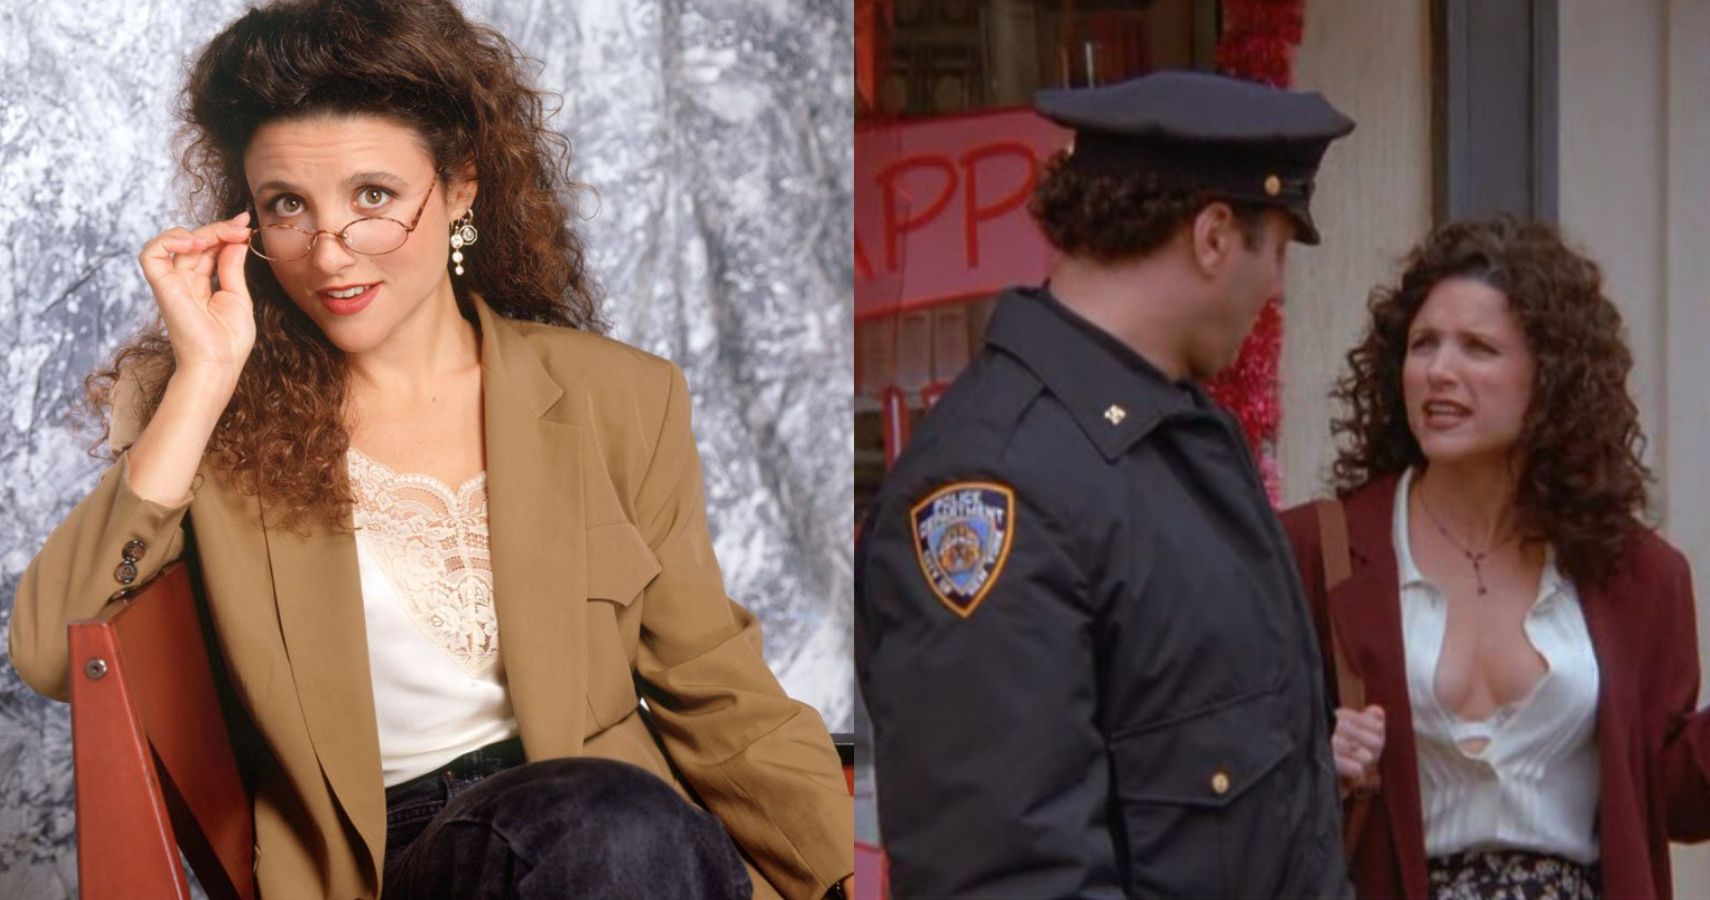 Old School TV Style: Fashion Inspired by Elaine from Seinfeld